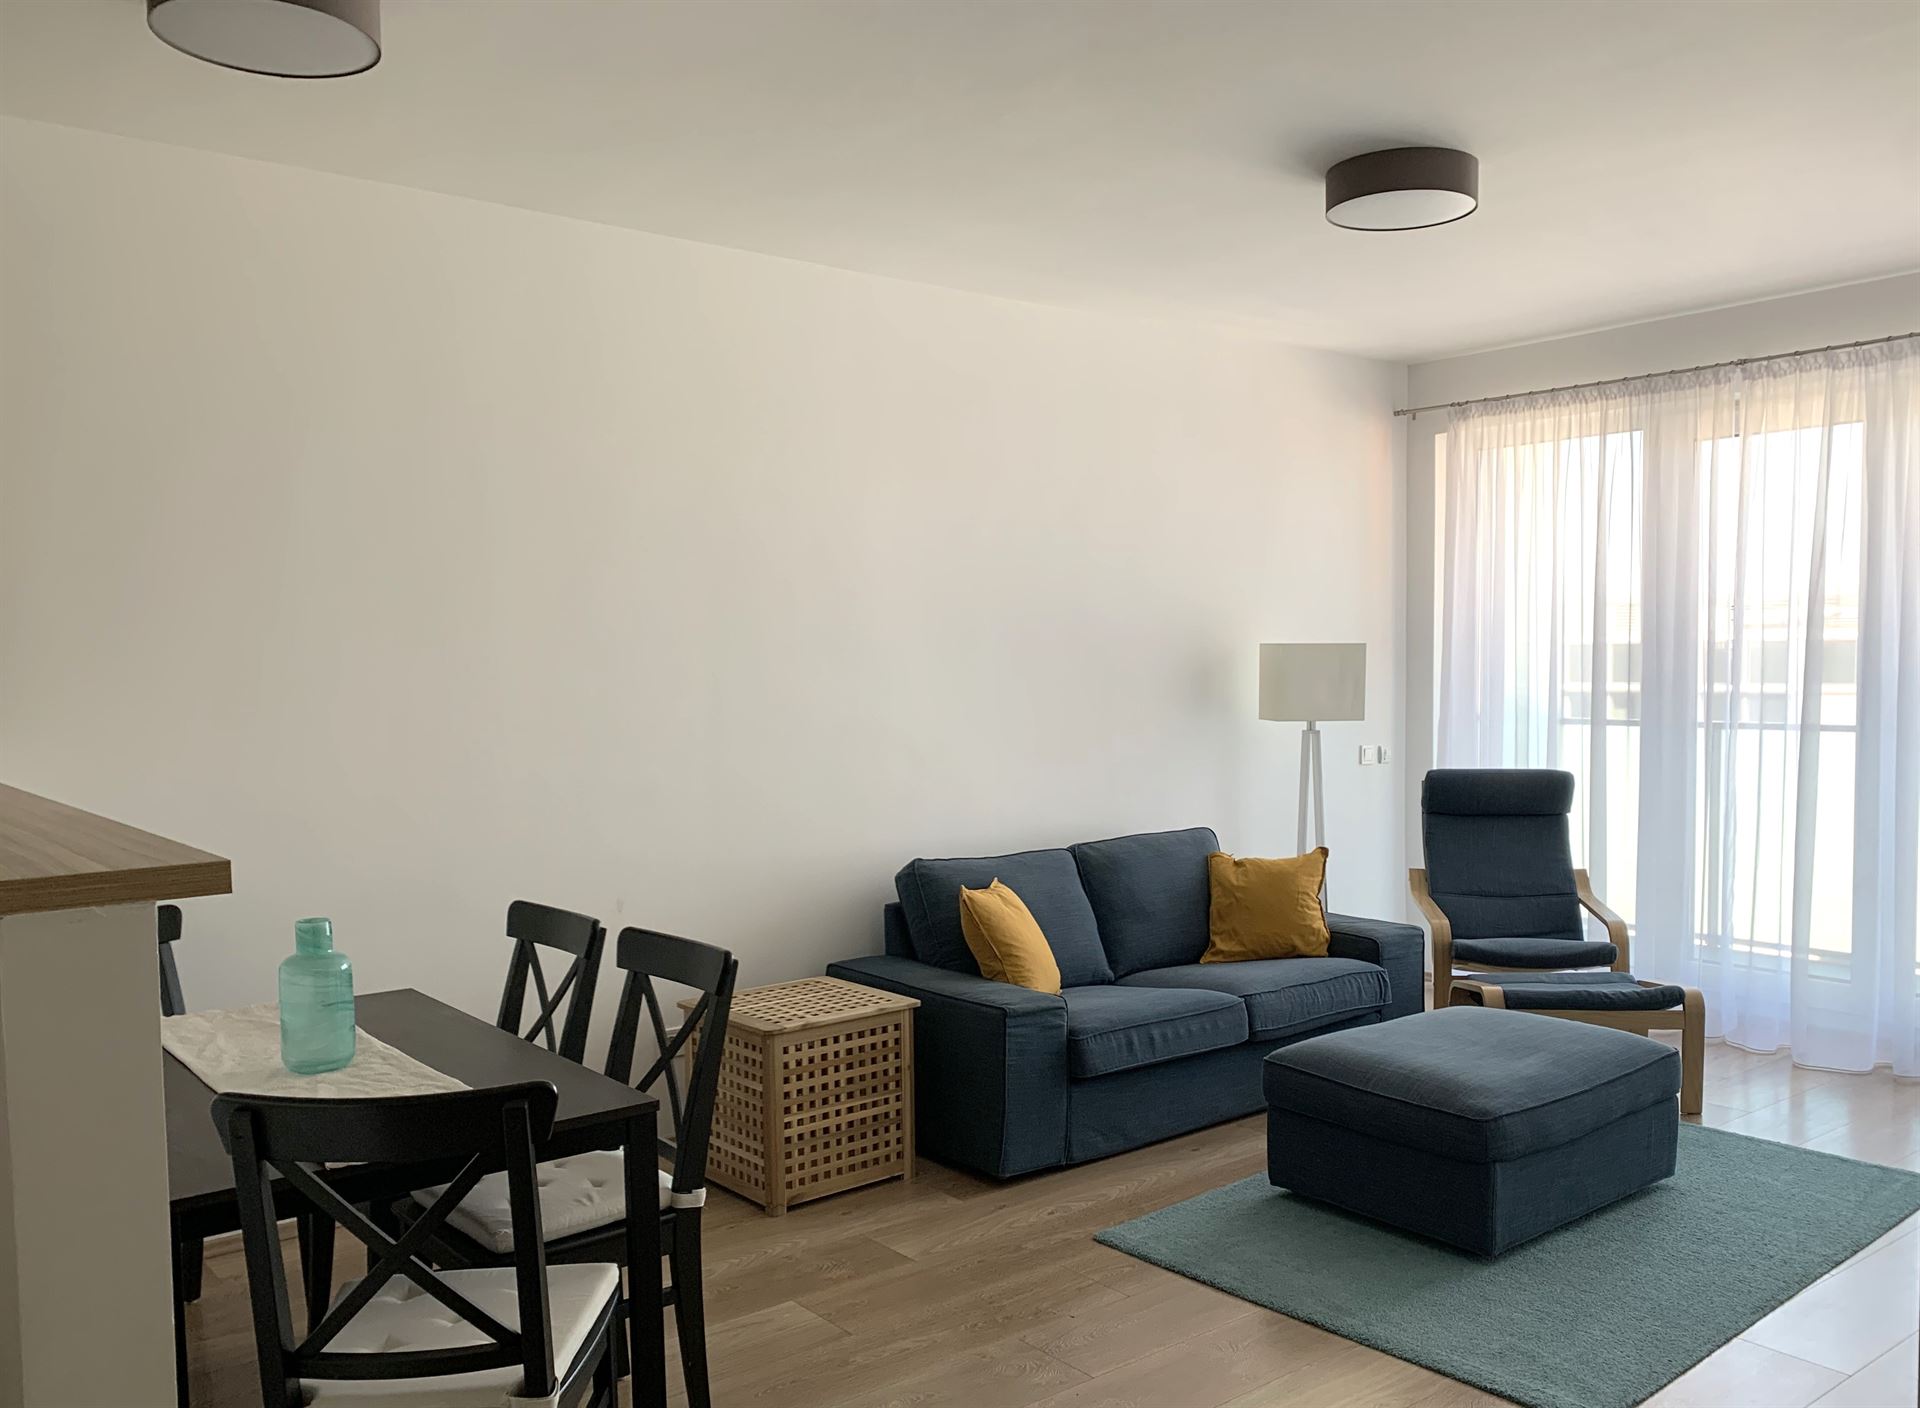 budapest-rental-long-term-property-for-rent-district-13-flat-for-rent-new-condo-rental7